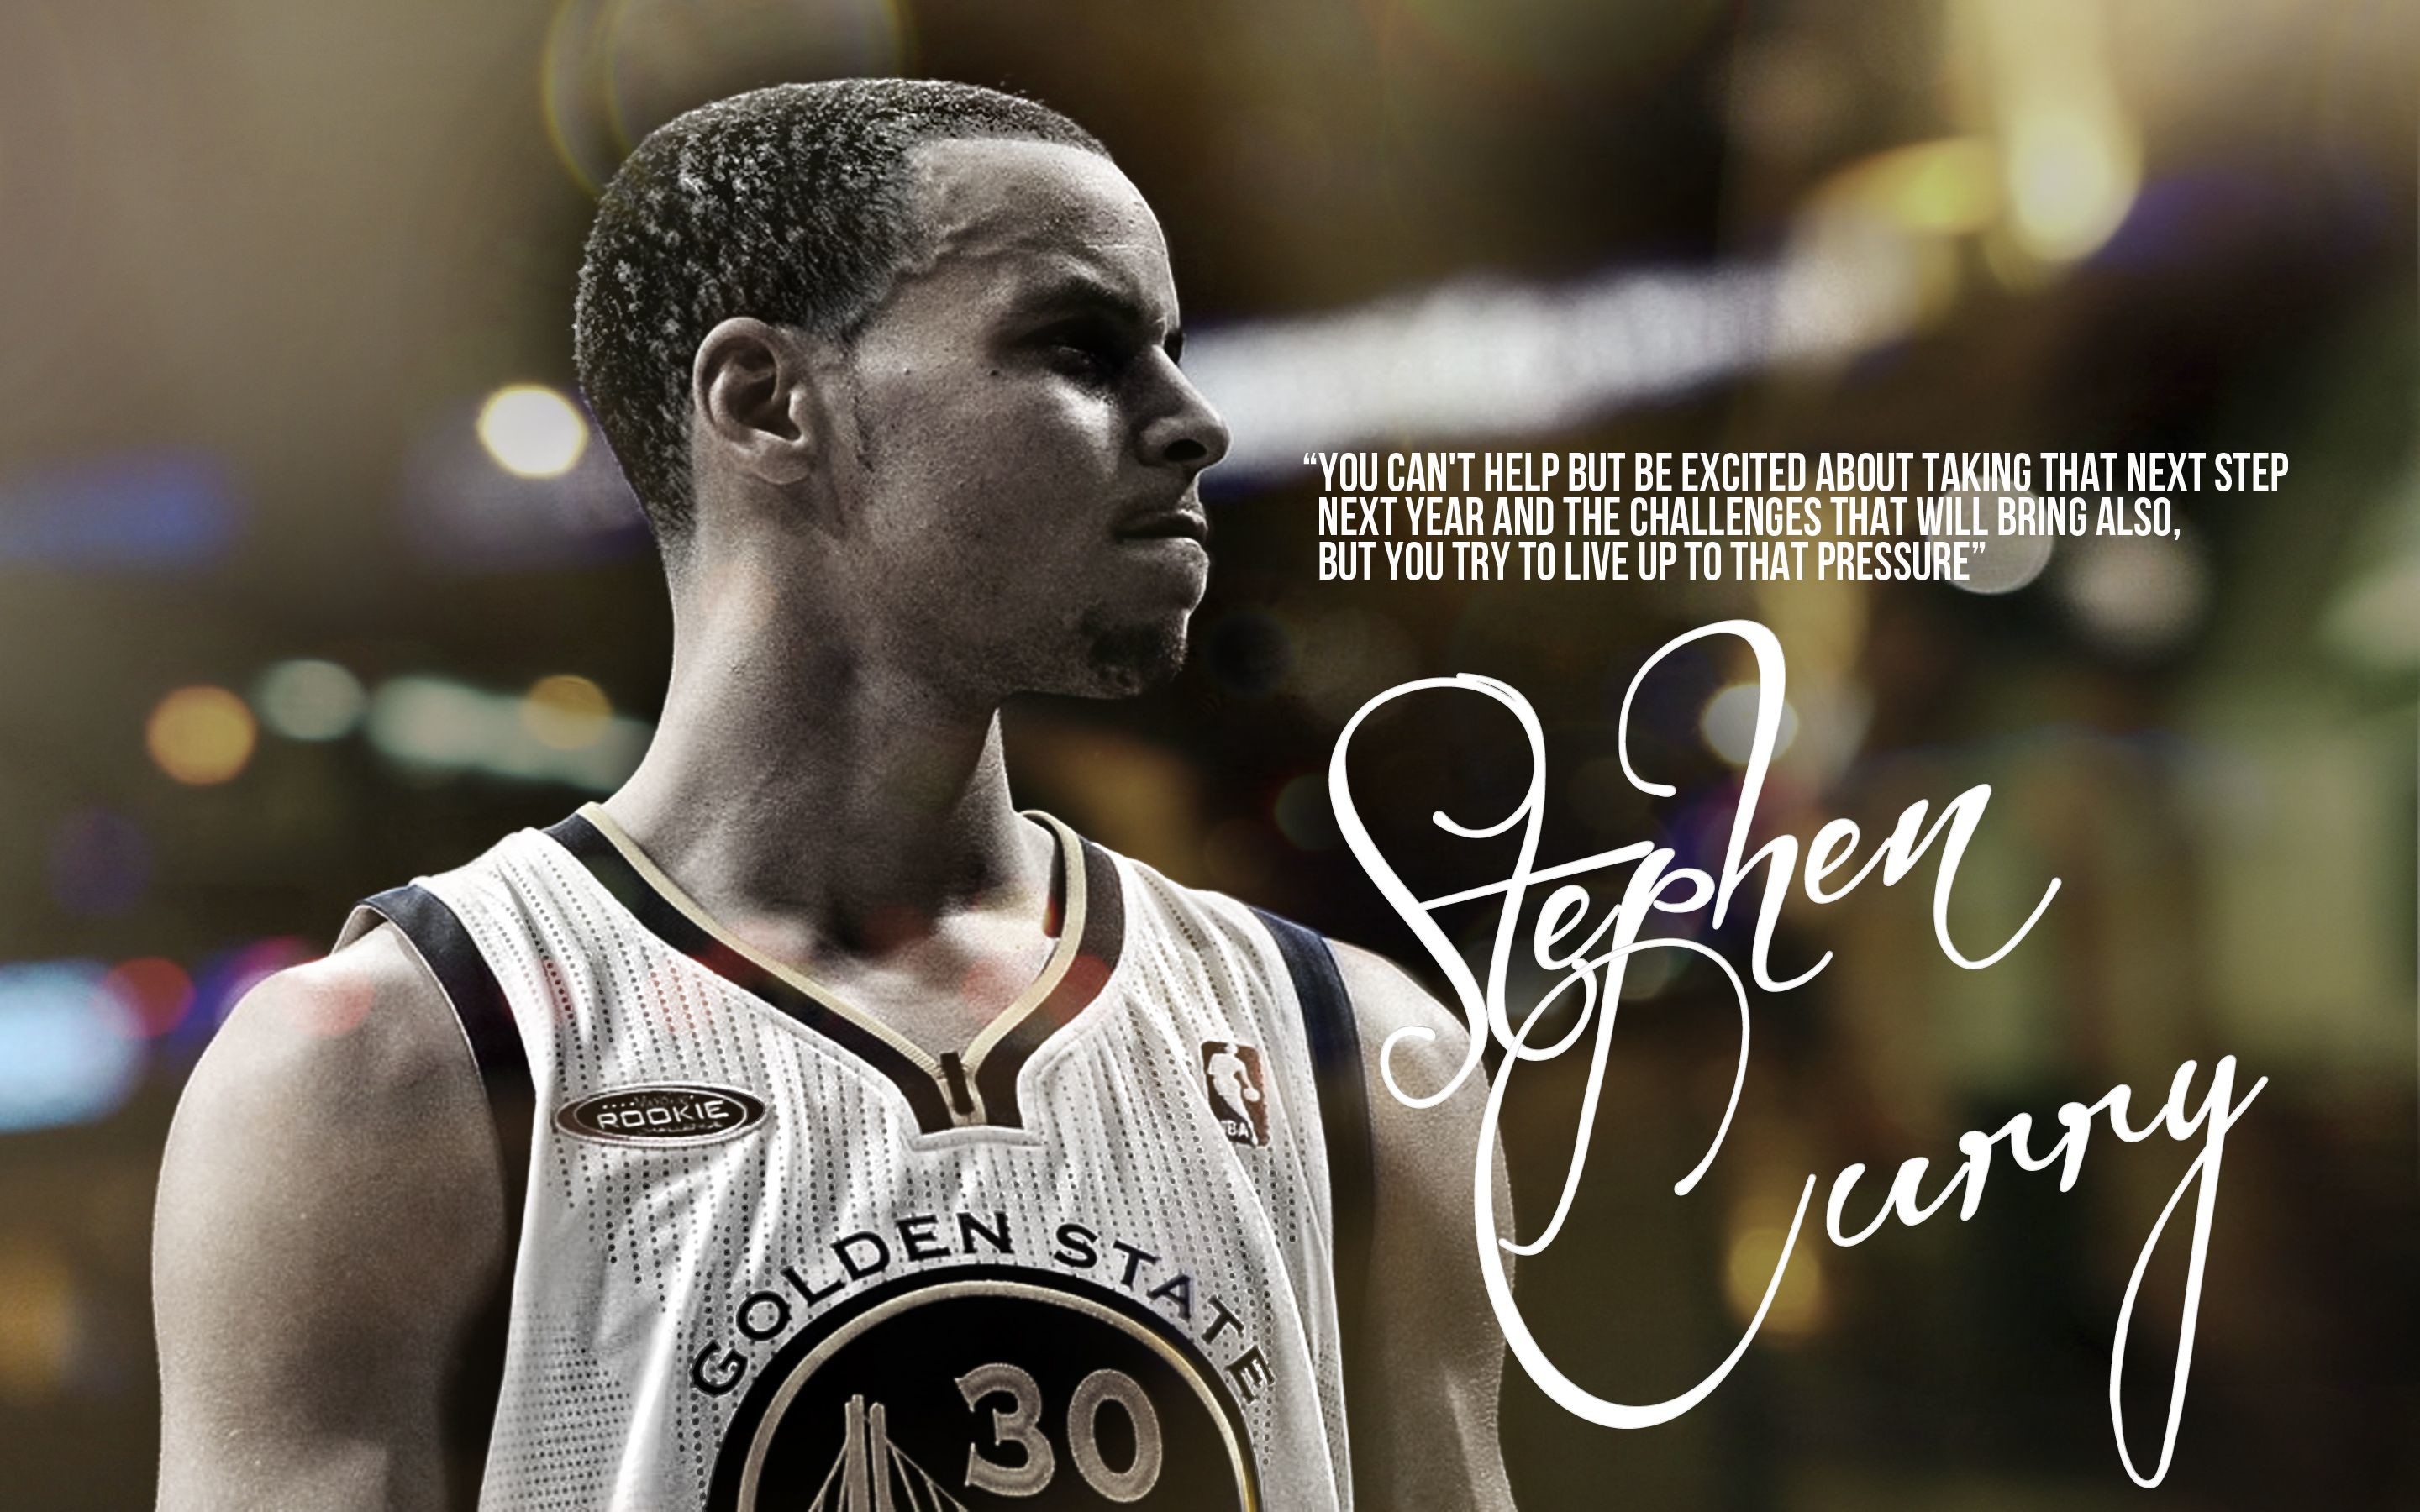 Wallpaper.wiki HD Stephen Curry Android Images PIC